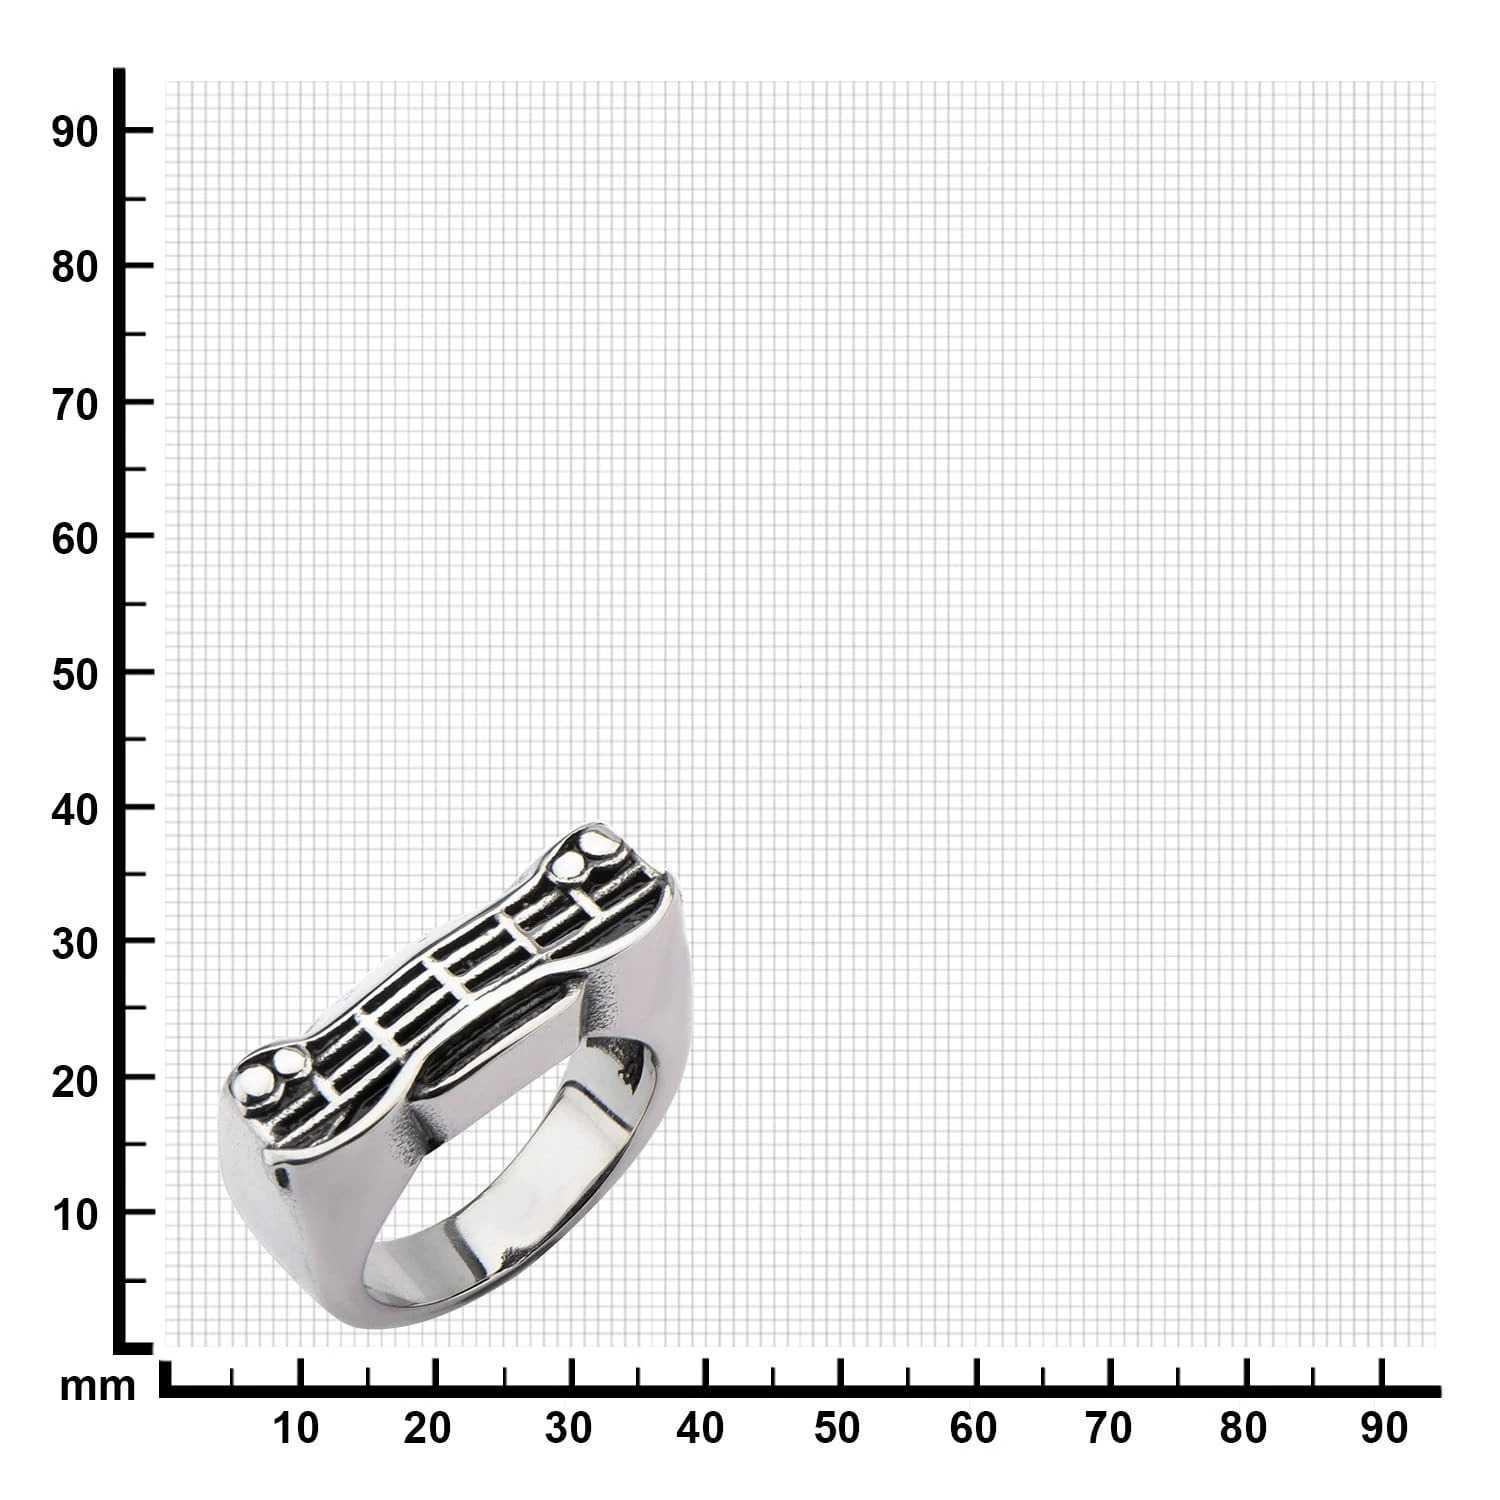 INOX JEWELRY Rings Antiqued Silver Tone Stainless Steel Classic Car Grille Ring